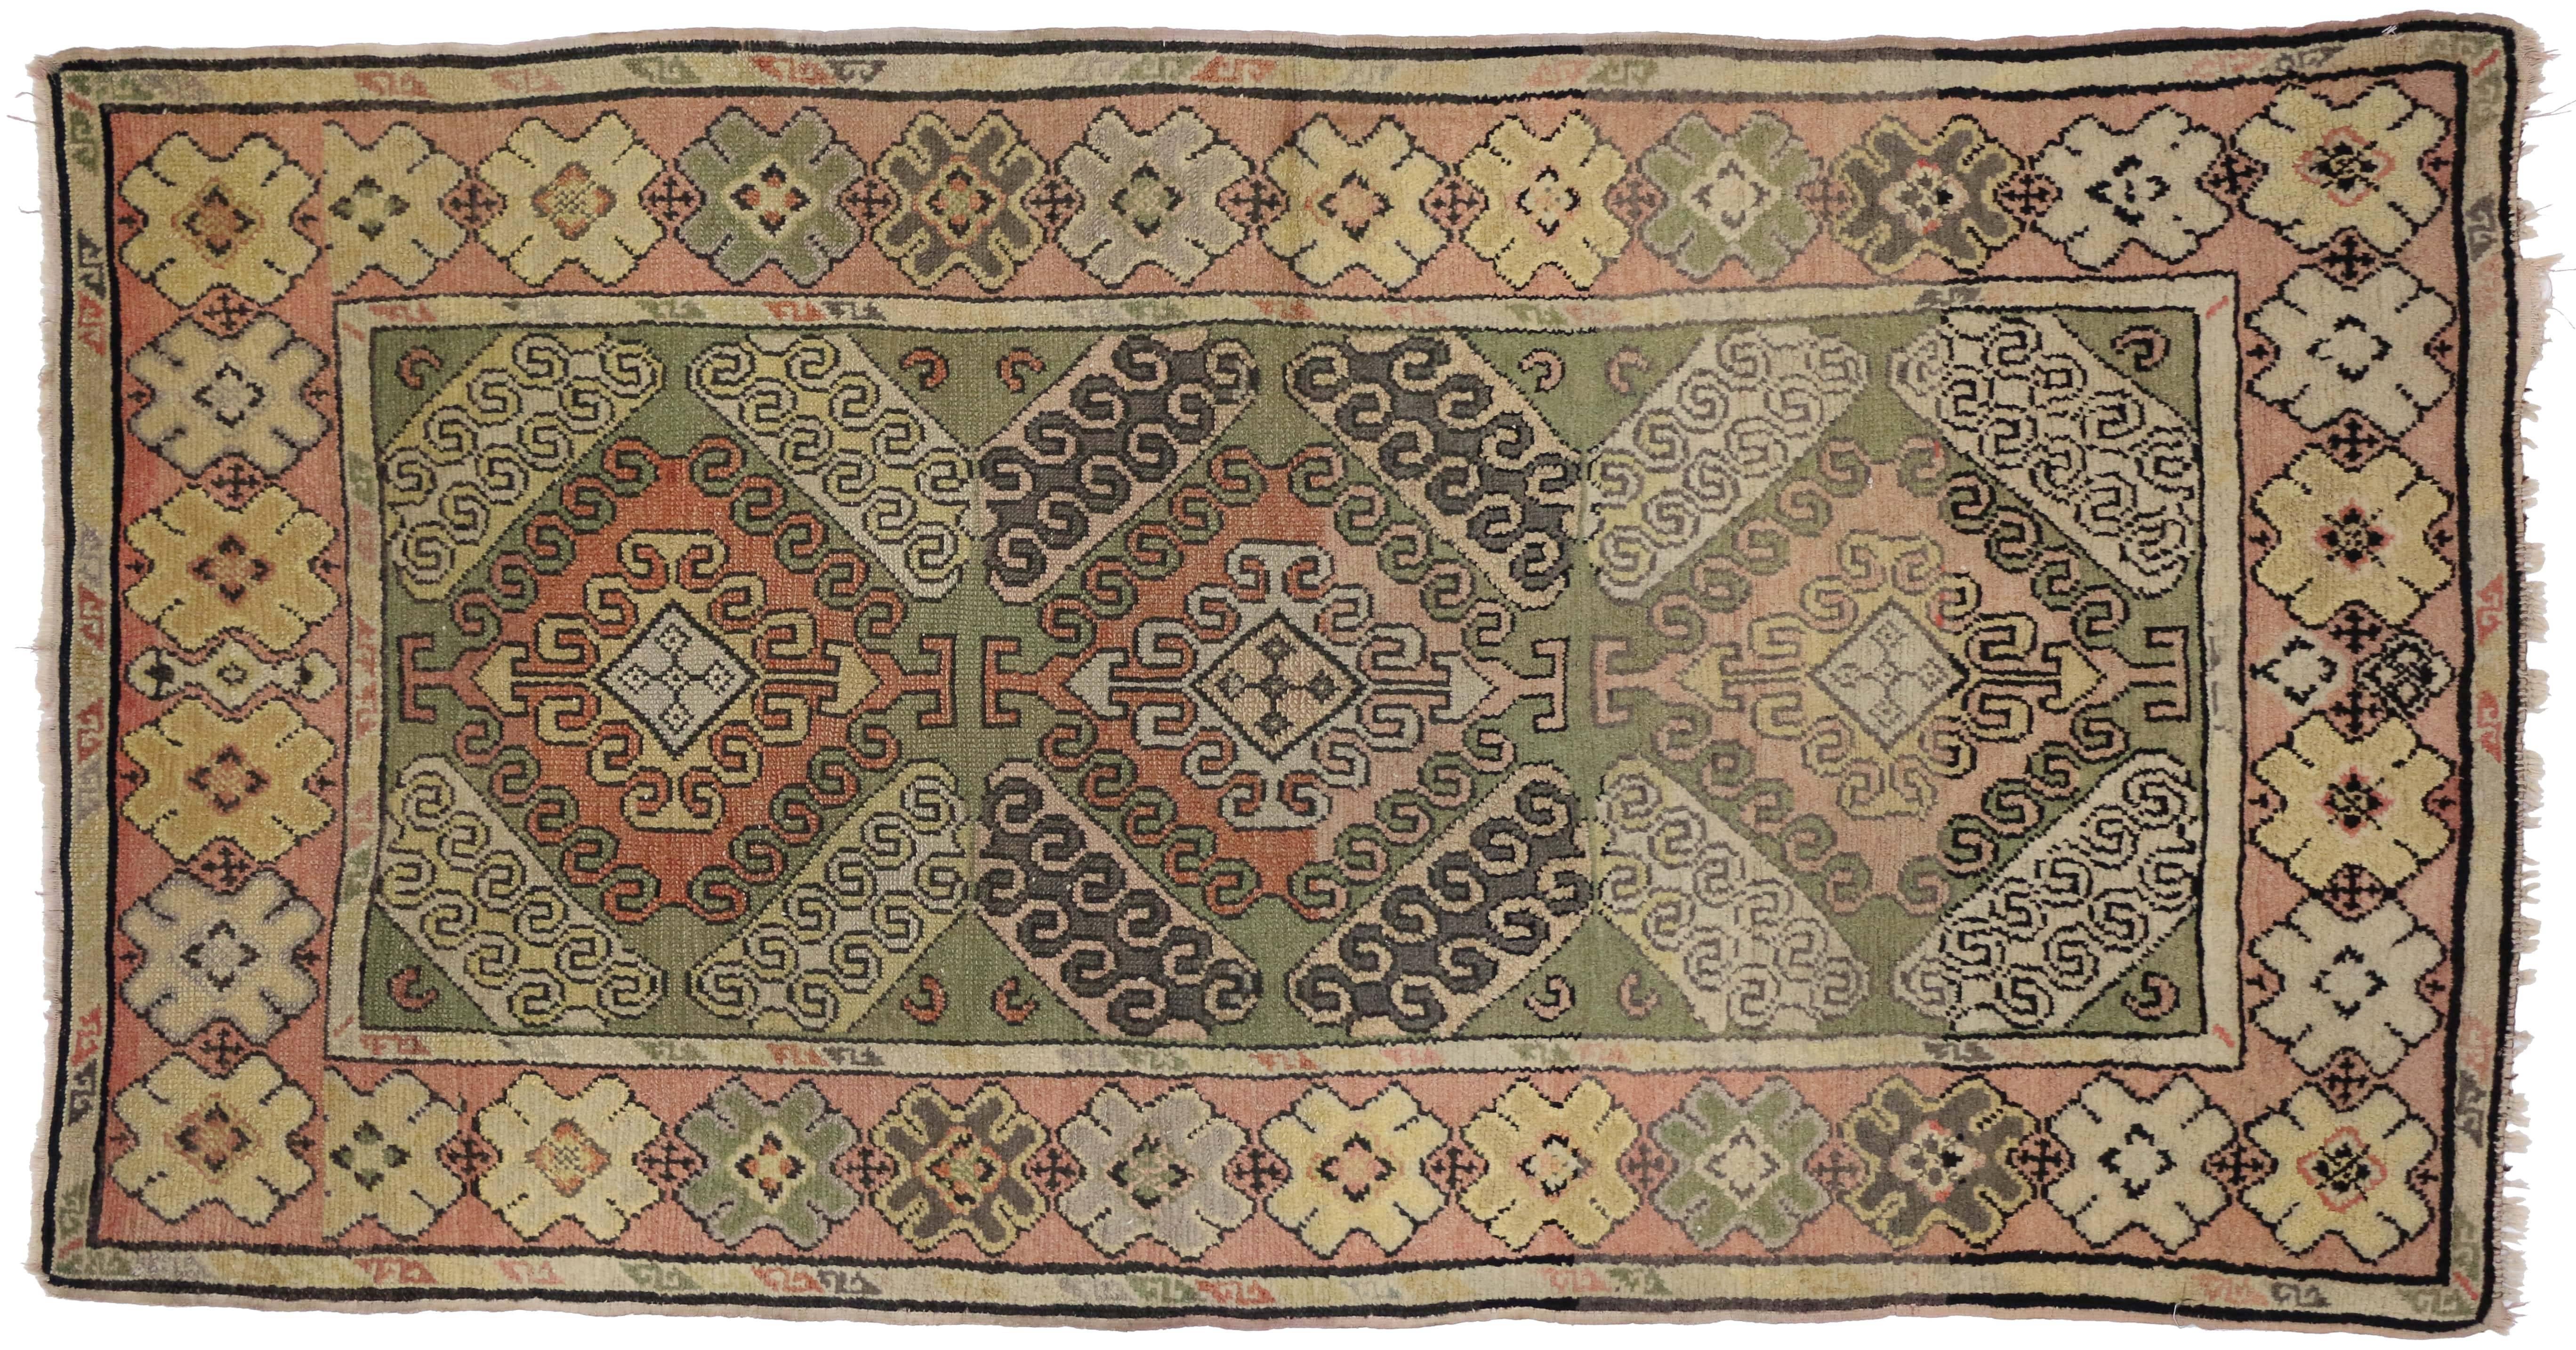 73965, antique Turkish Oushak rug in a classic amulet design. This hand-knotted wool antique Oushak rug features triple amulets centered with diamond patterns that represent the 